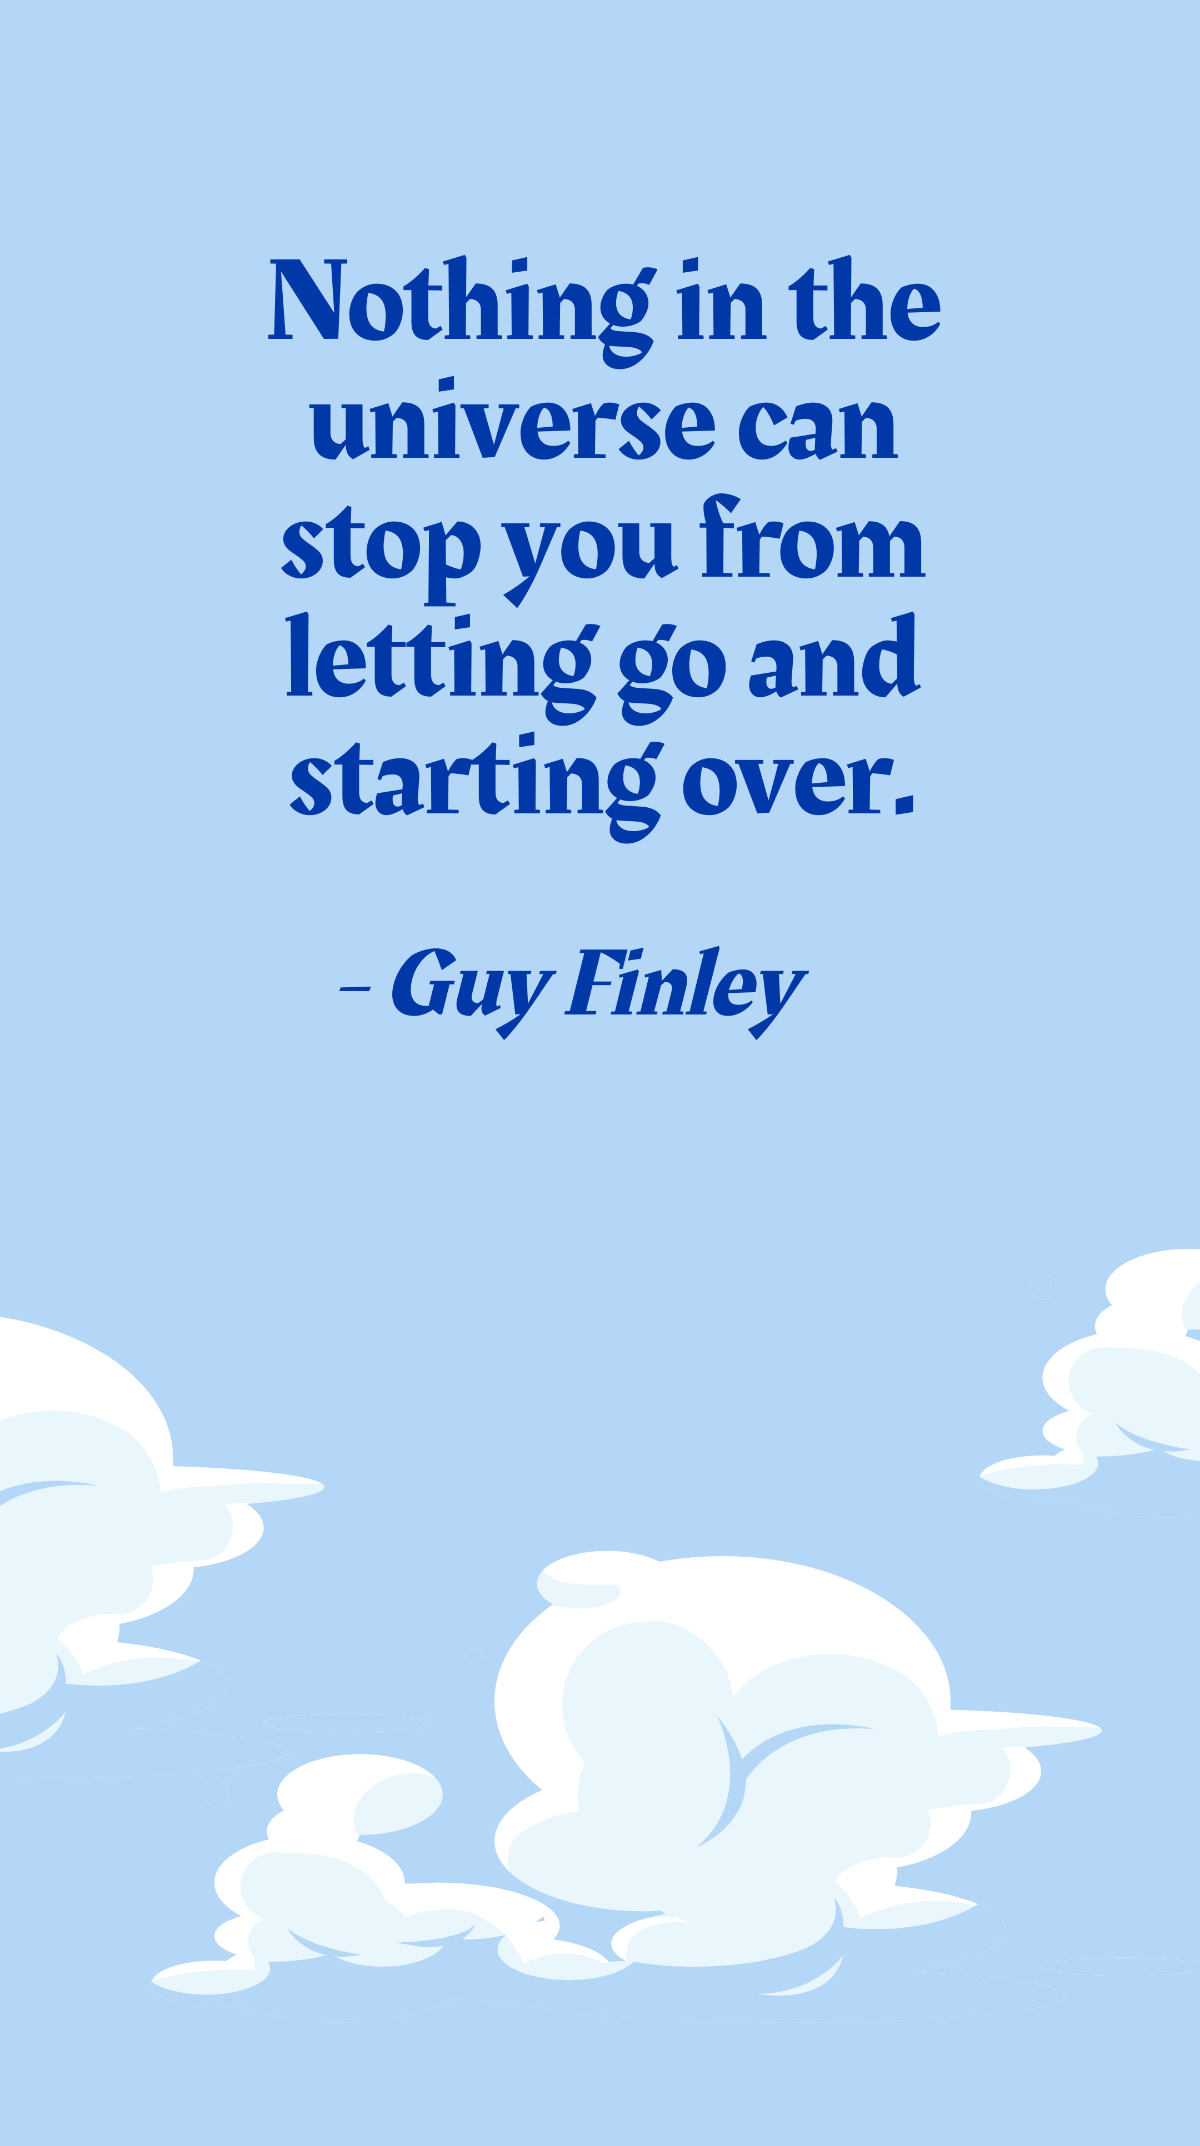 Guy Finley - Nothing in the universe can stop you from letting go and starting over. Template